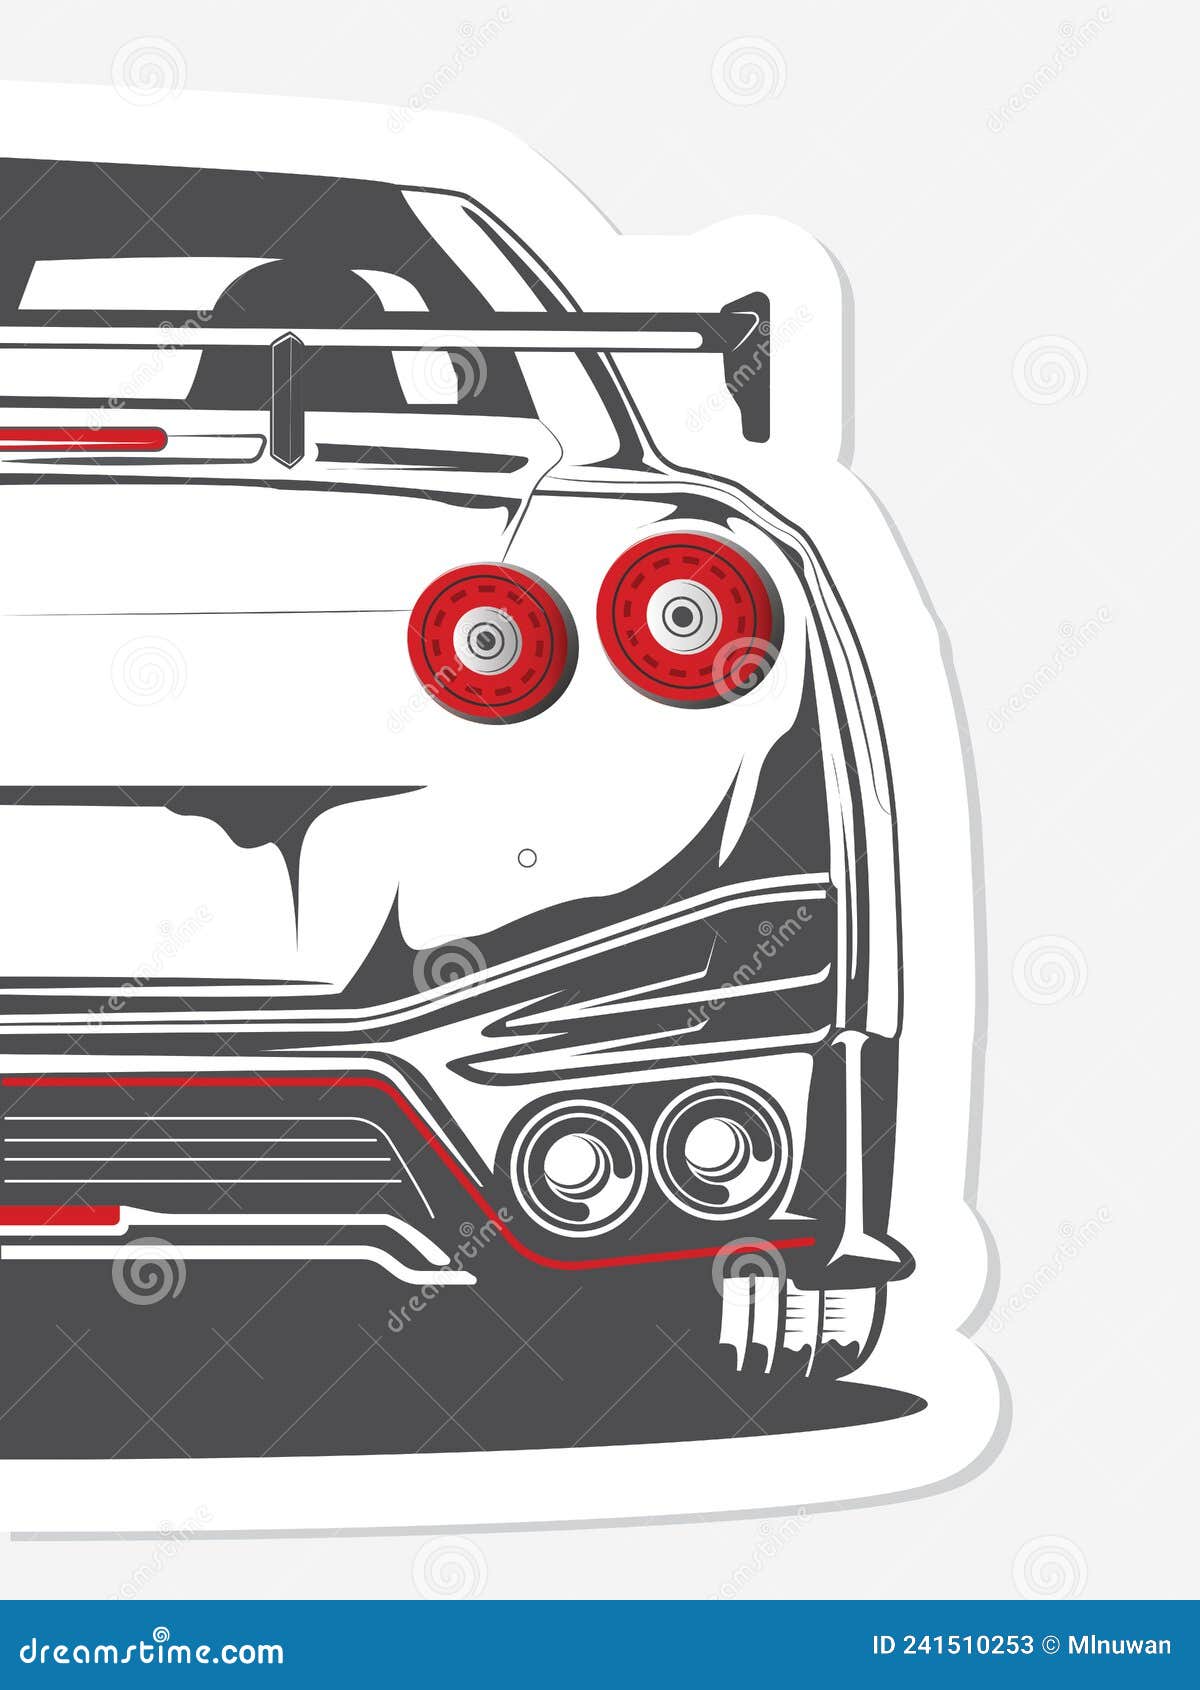 Japanese Car Decals Stock Illustrations – 56 Japanese Car Decals Stock  Illustrations, Vectors & Clipart - Dreamstime